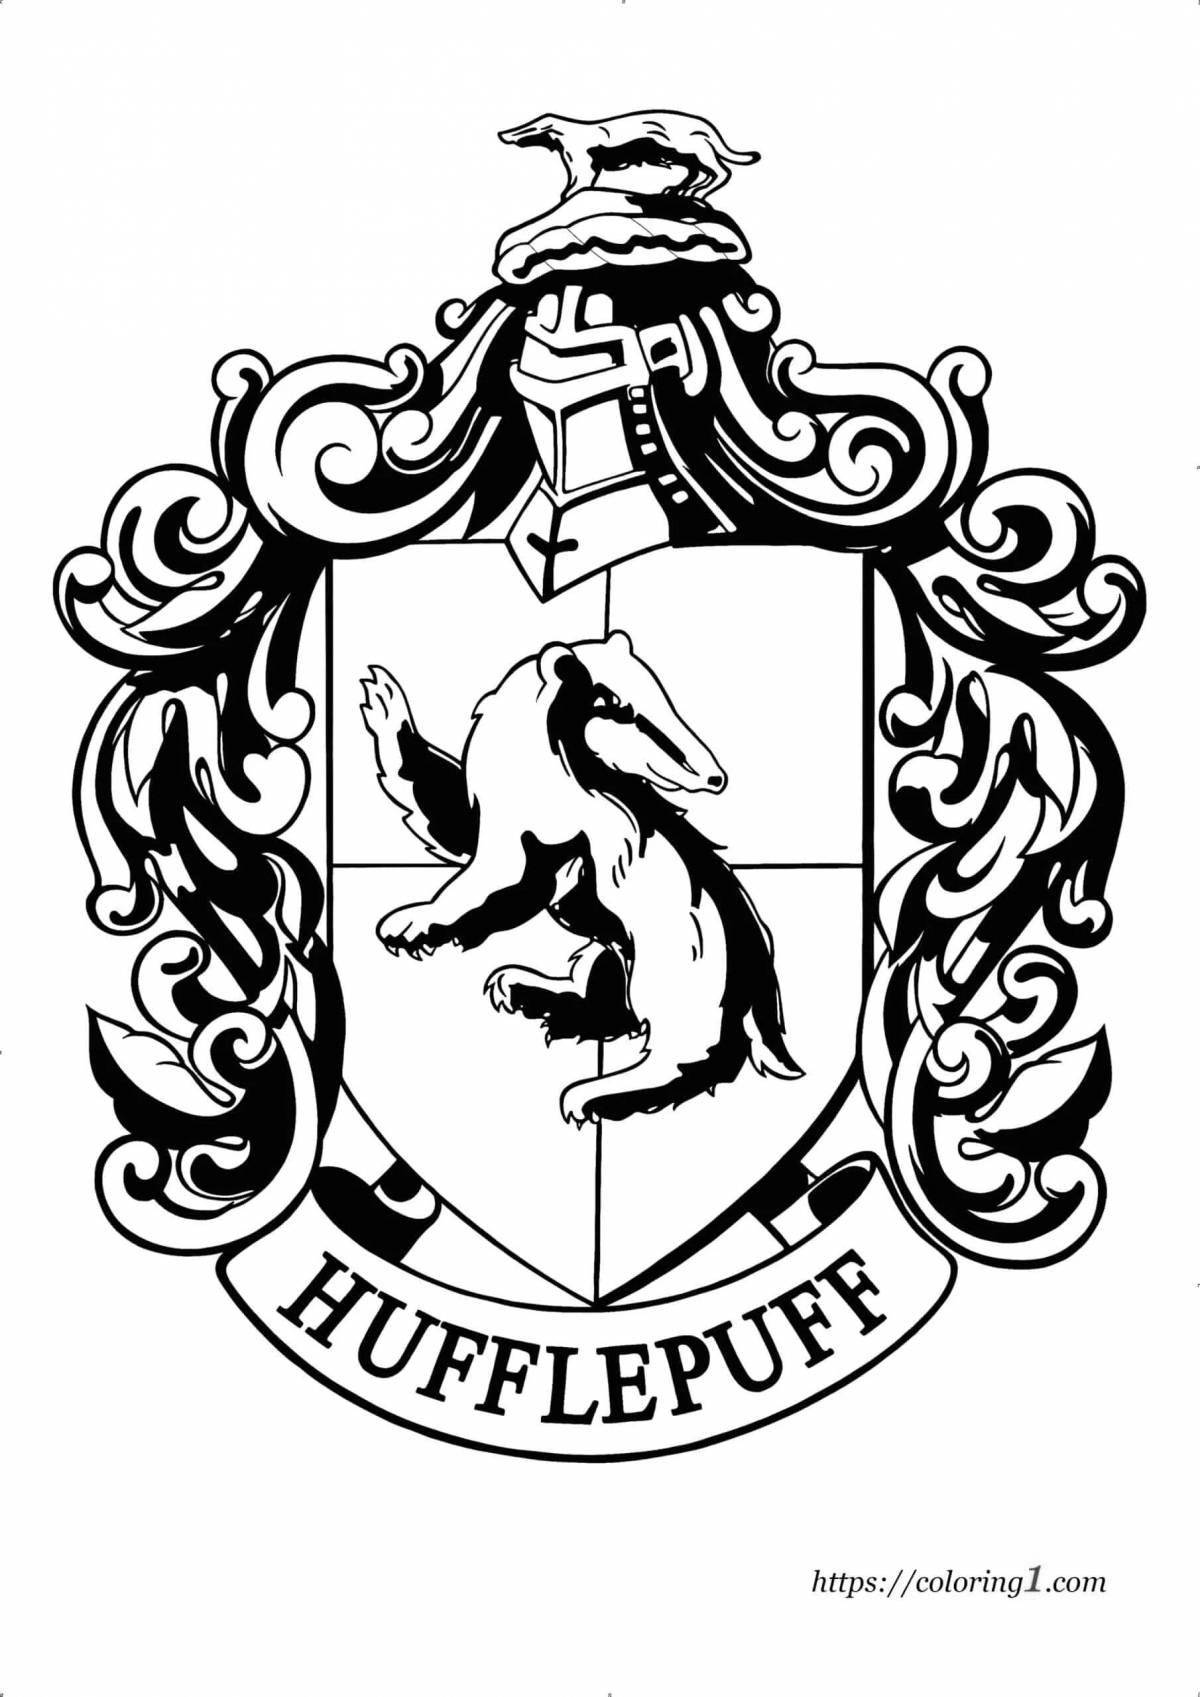 Ravenclaw deluxe coat of arms coloring page